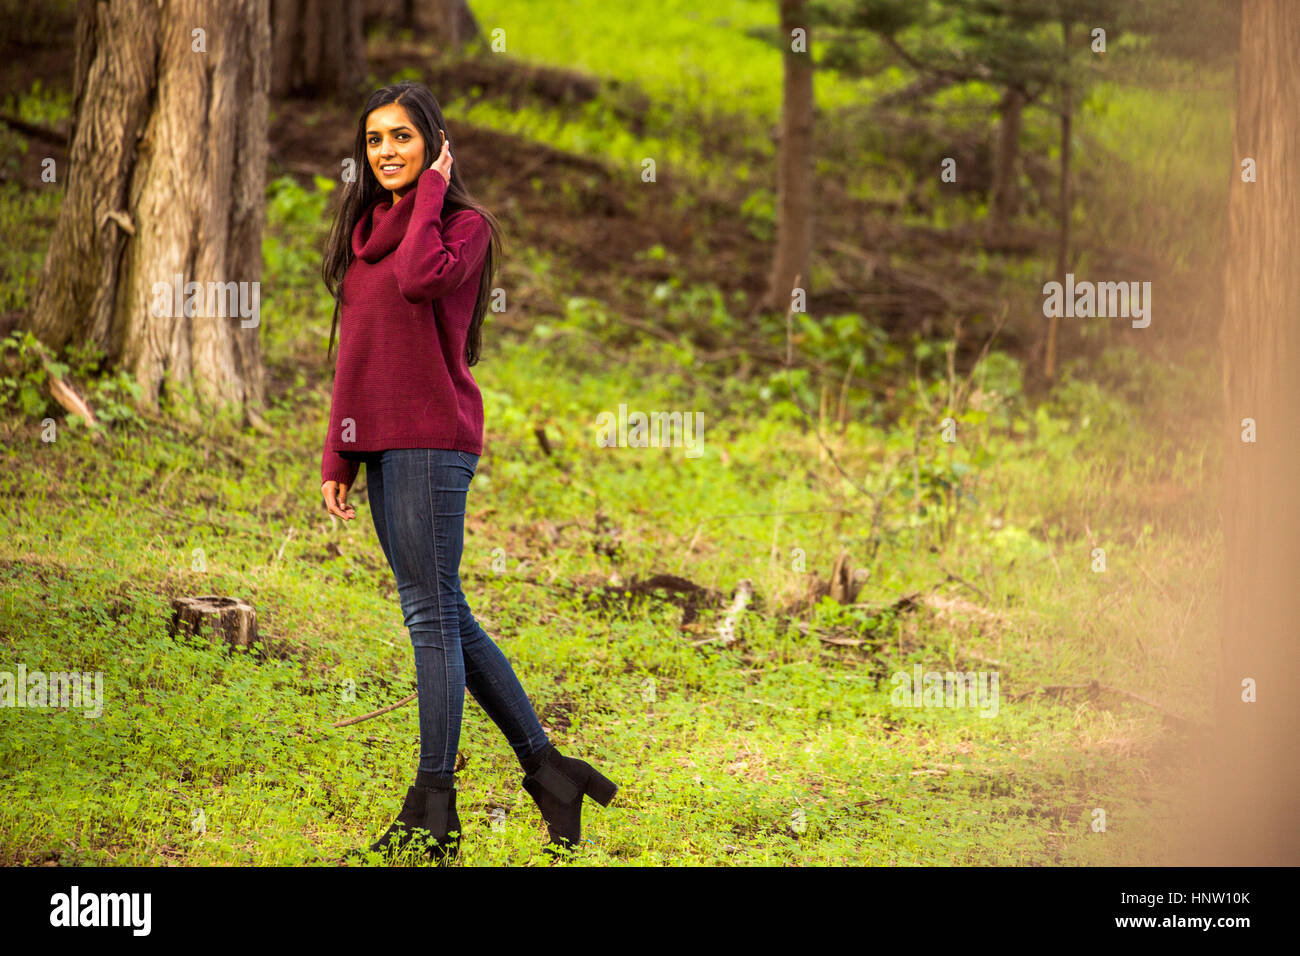 Smiling Indian woman posing in forest Stock Photo